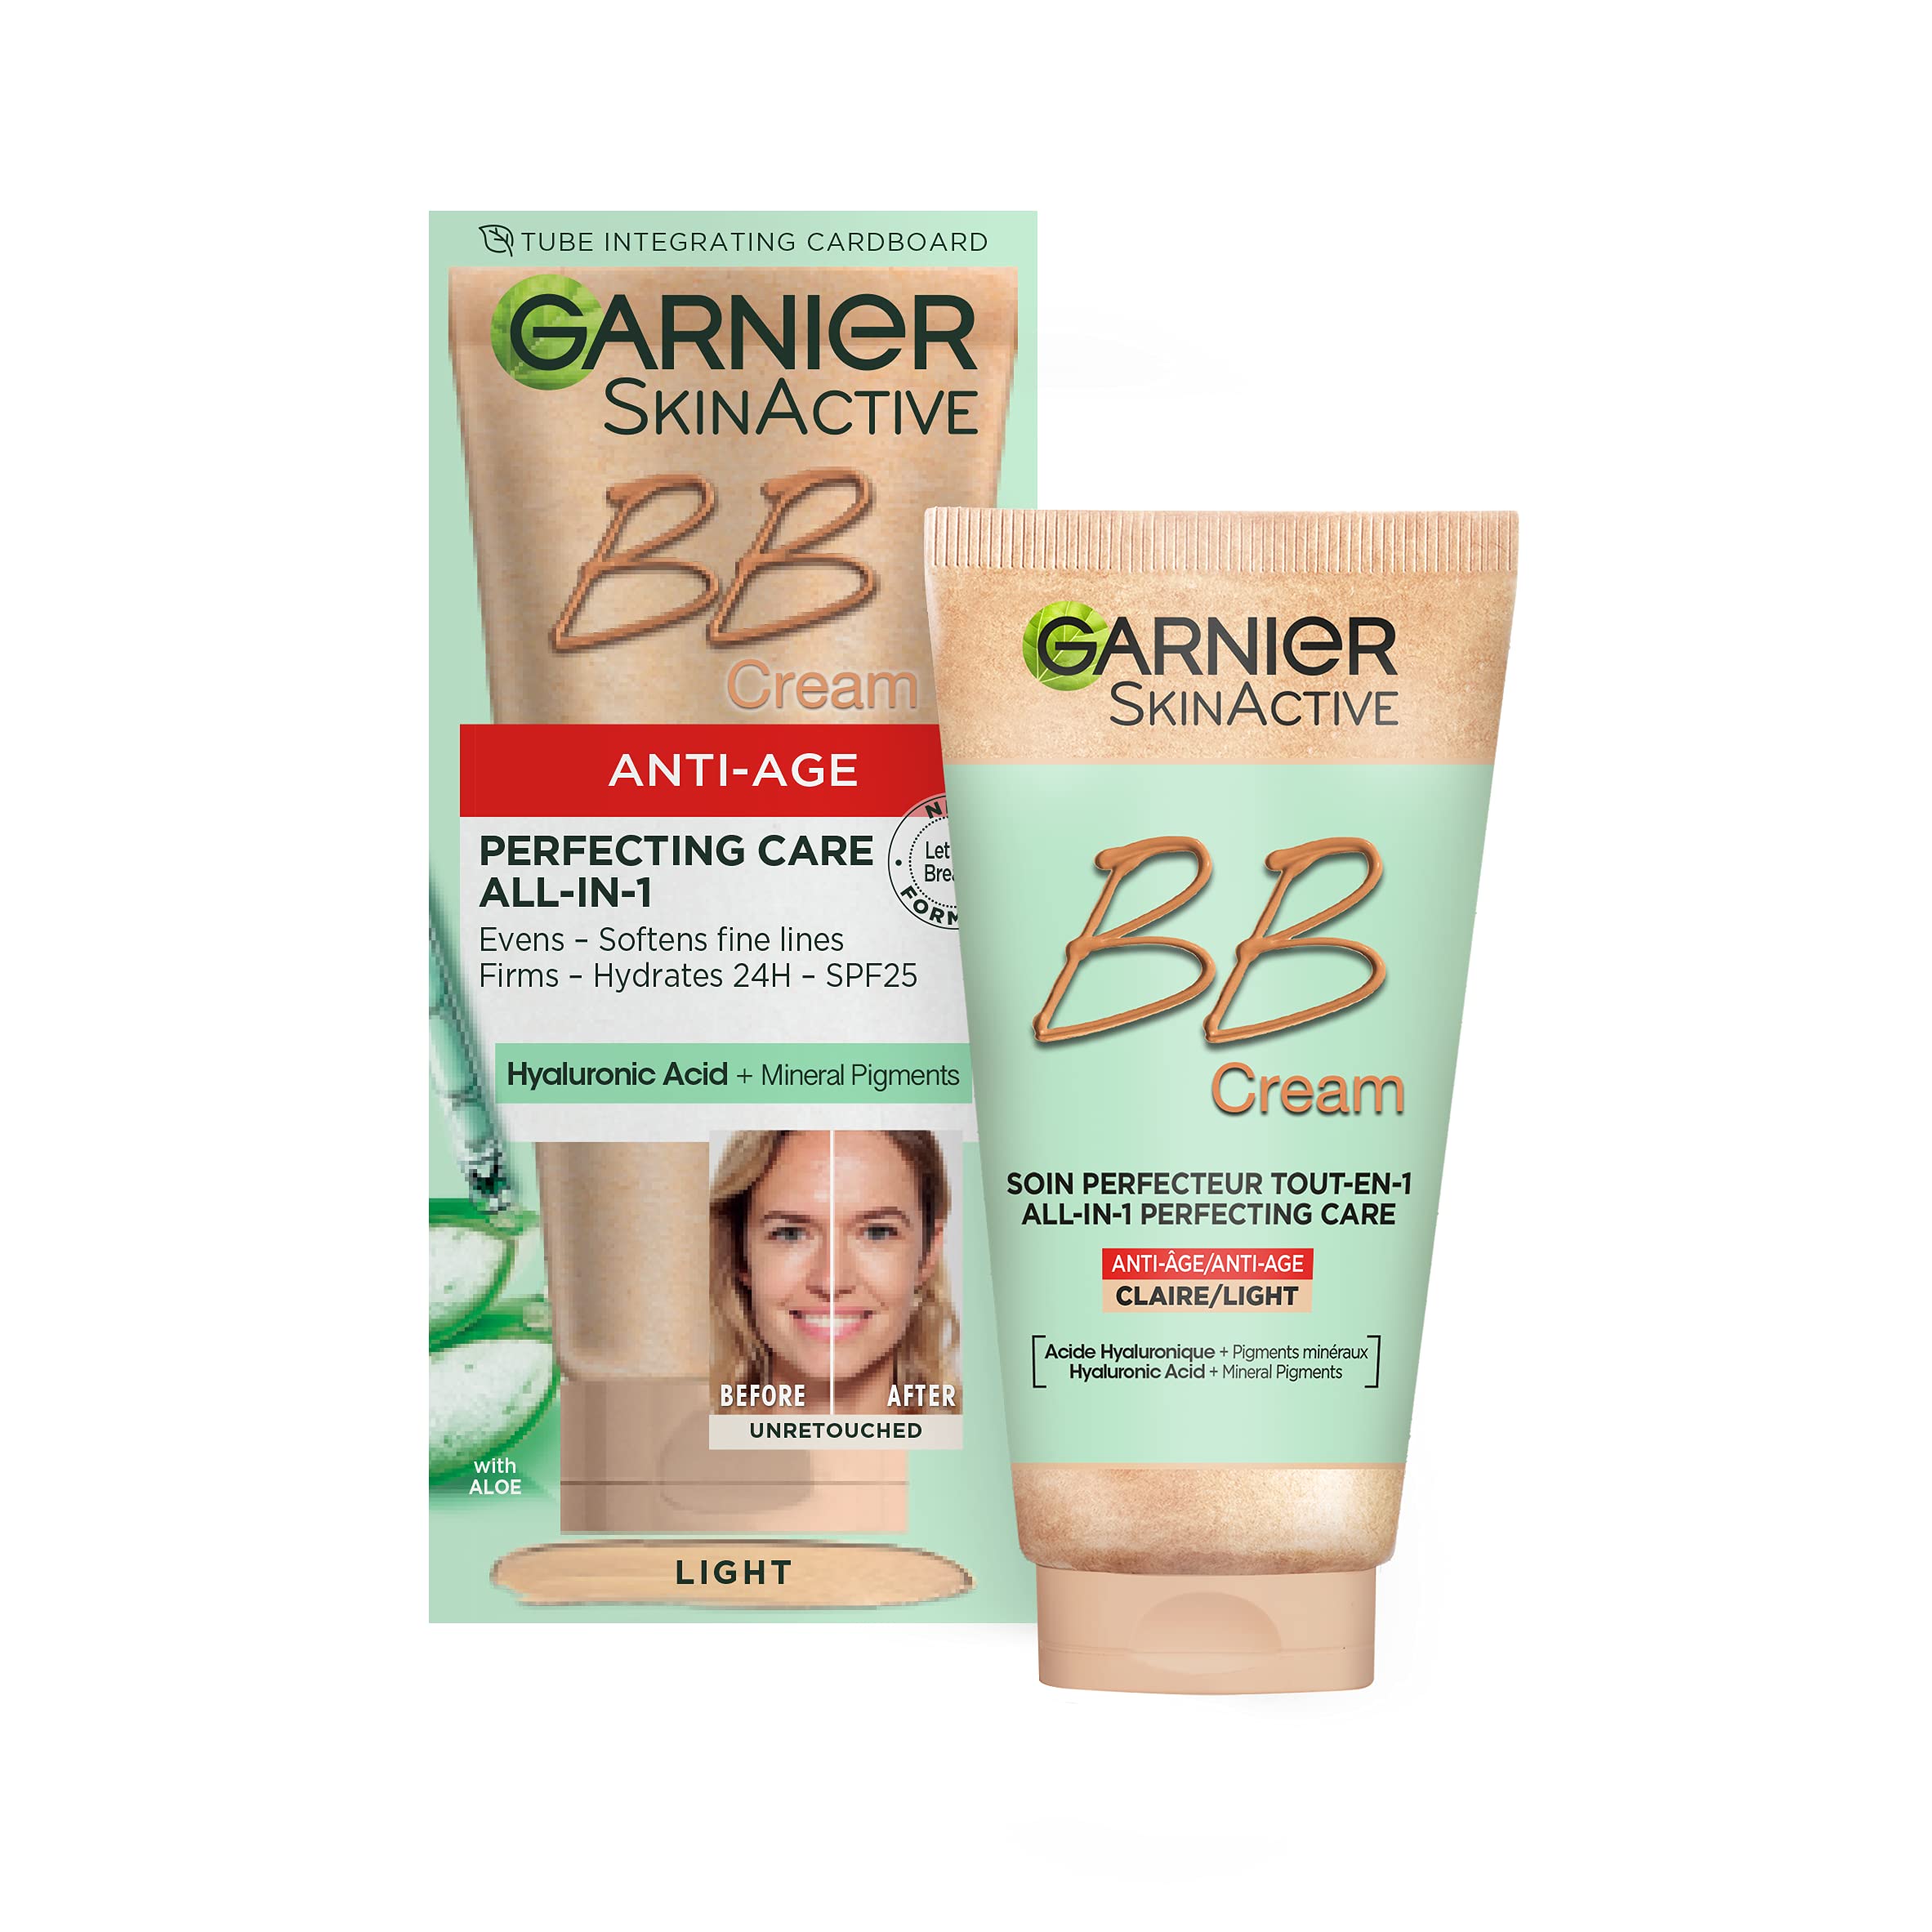 NEW & IMPROVED Garnier SkinActive Anti-Age BB Cream, Shade Light, Tinted Moisturiser SPF 25, Softens Fine Lines & Firms Skin, With Hyaluronic Acid, Aloe & Mineral Pigments, 50 ml